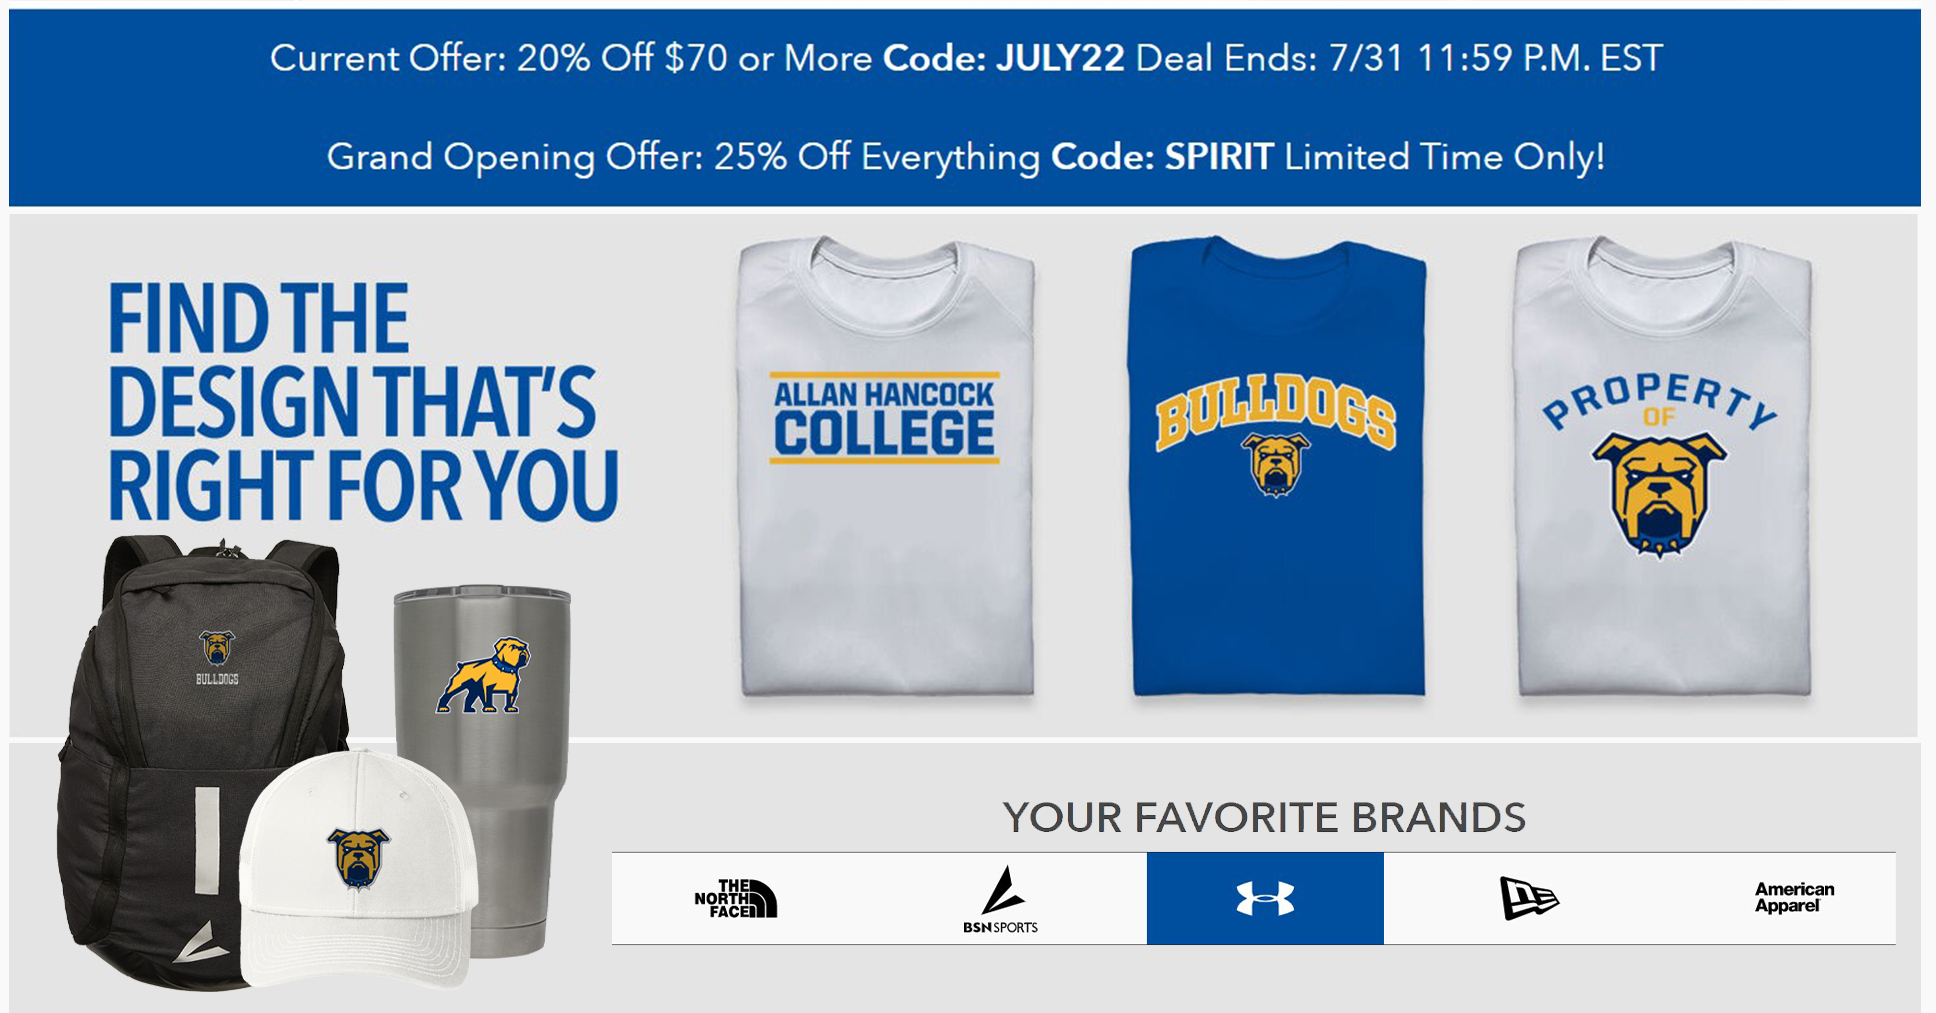 AHC Athletics Launches Sideline Store with BSN